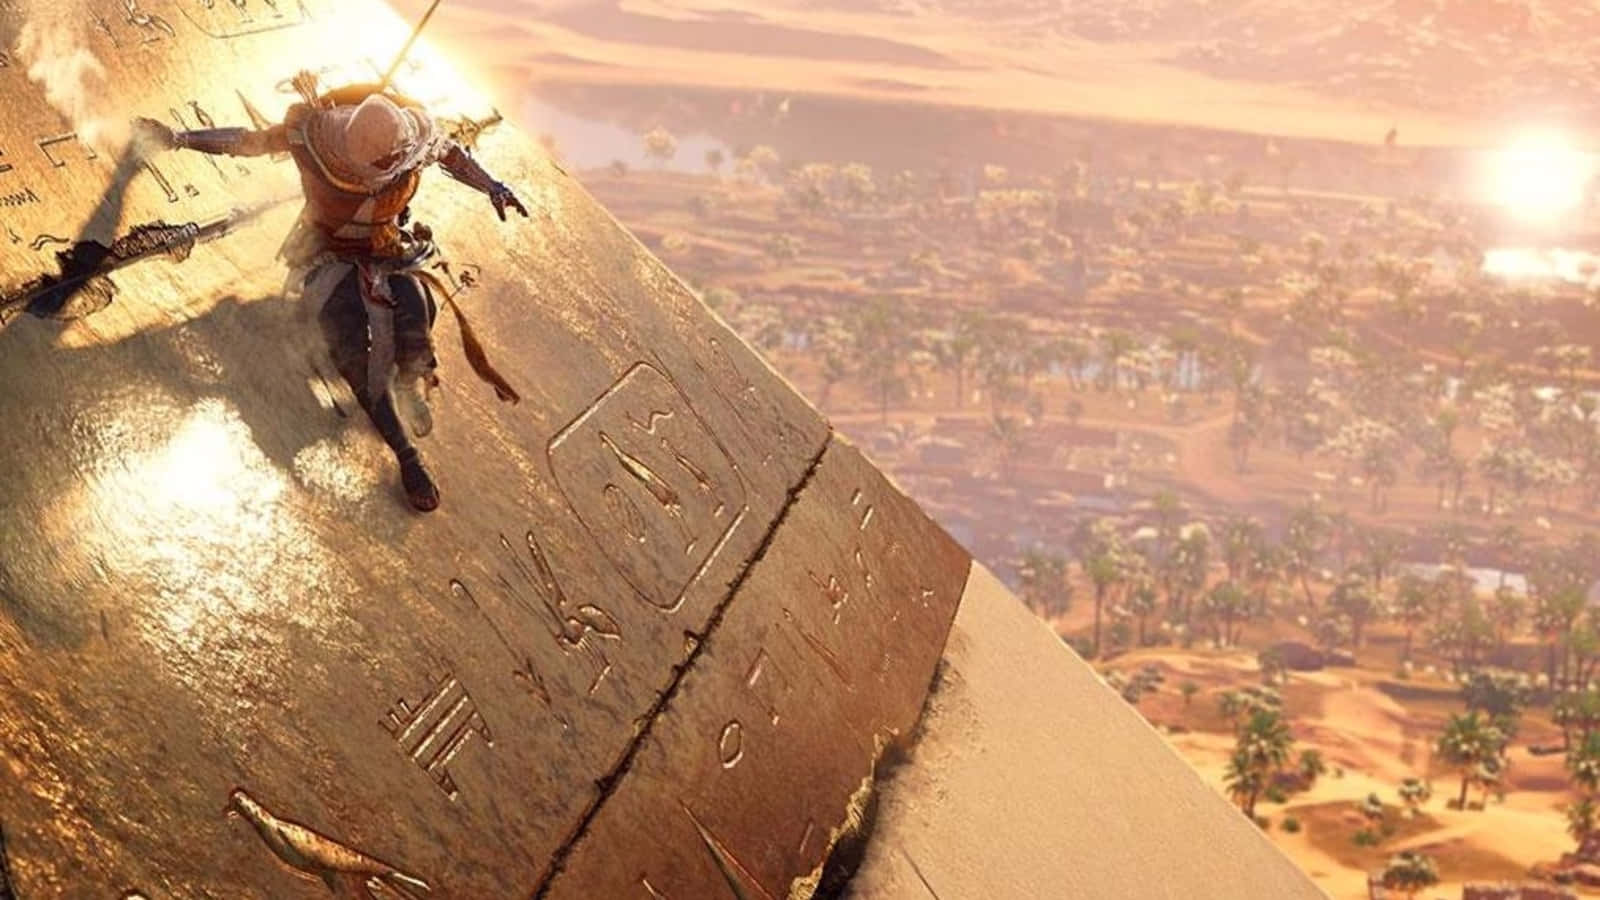 "Live an Epic Adventure in Assassin's Creed Origins"